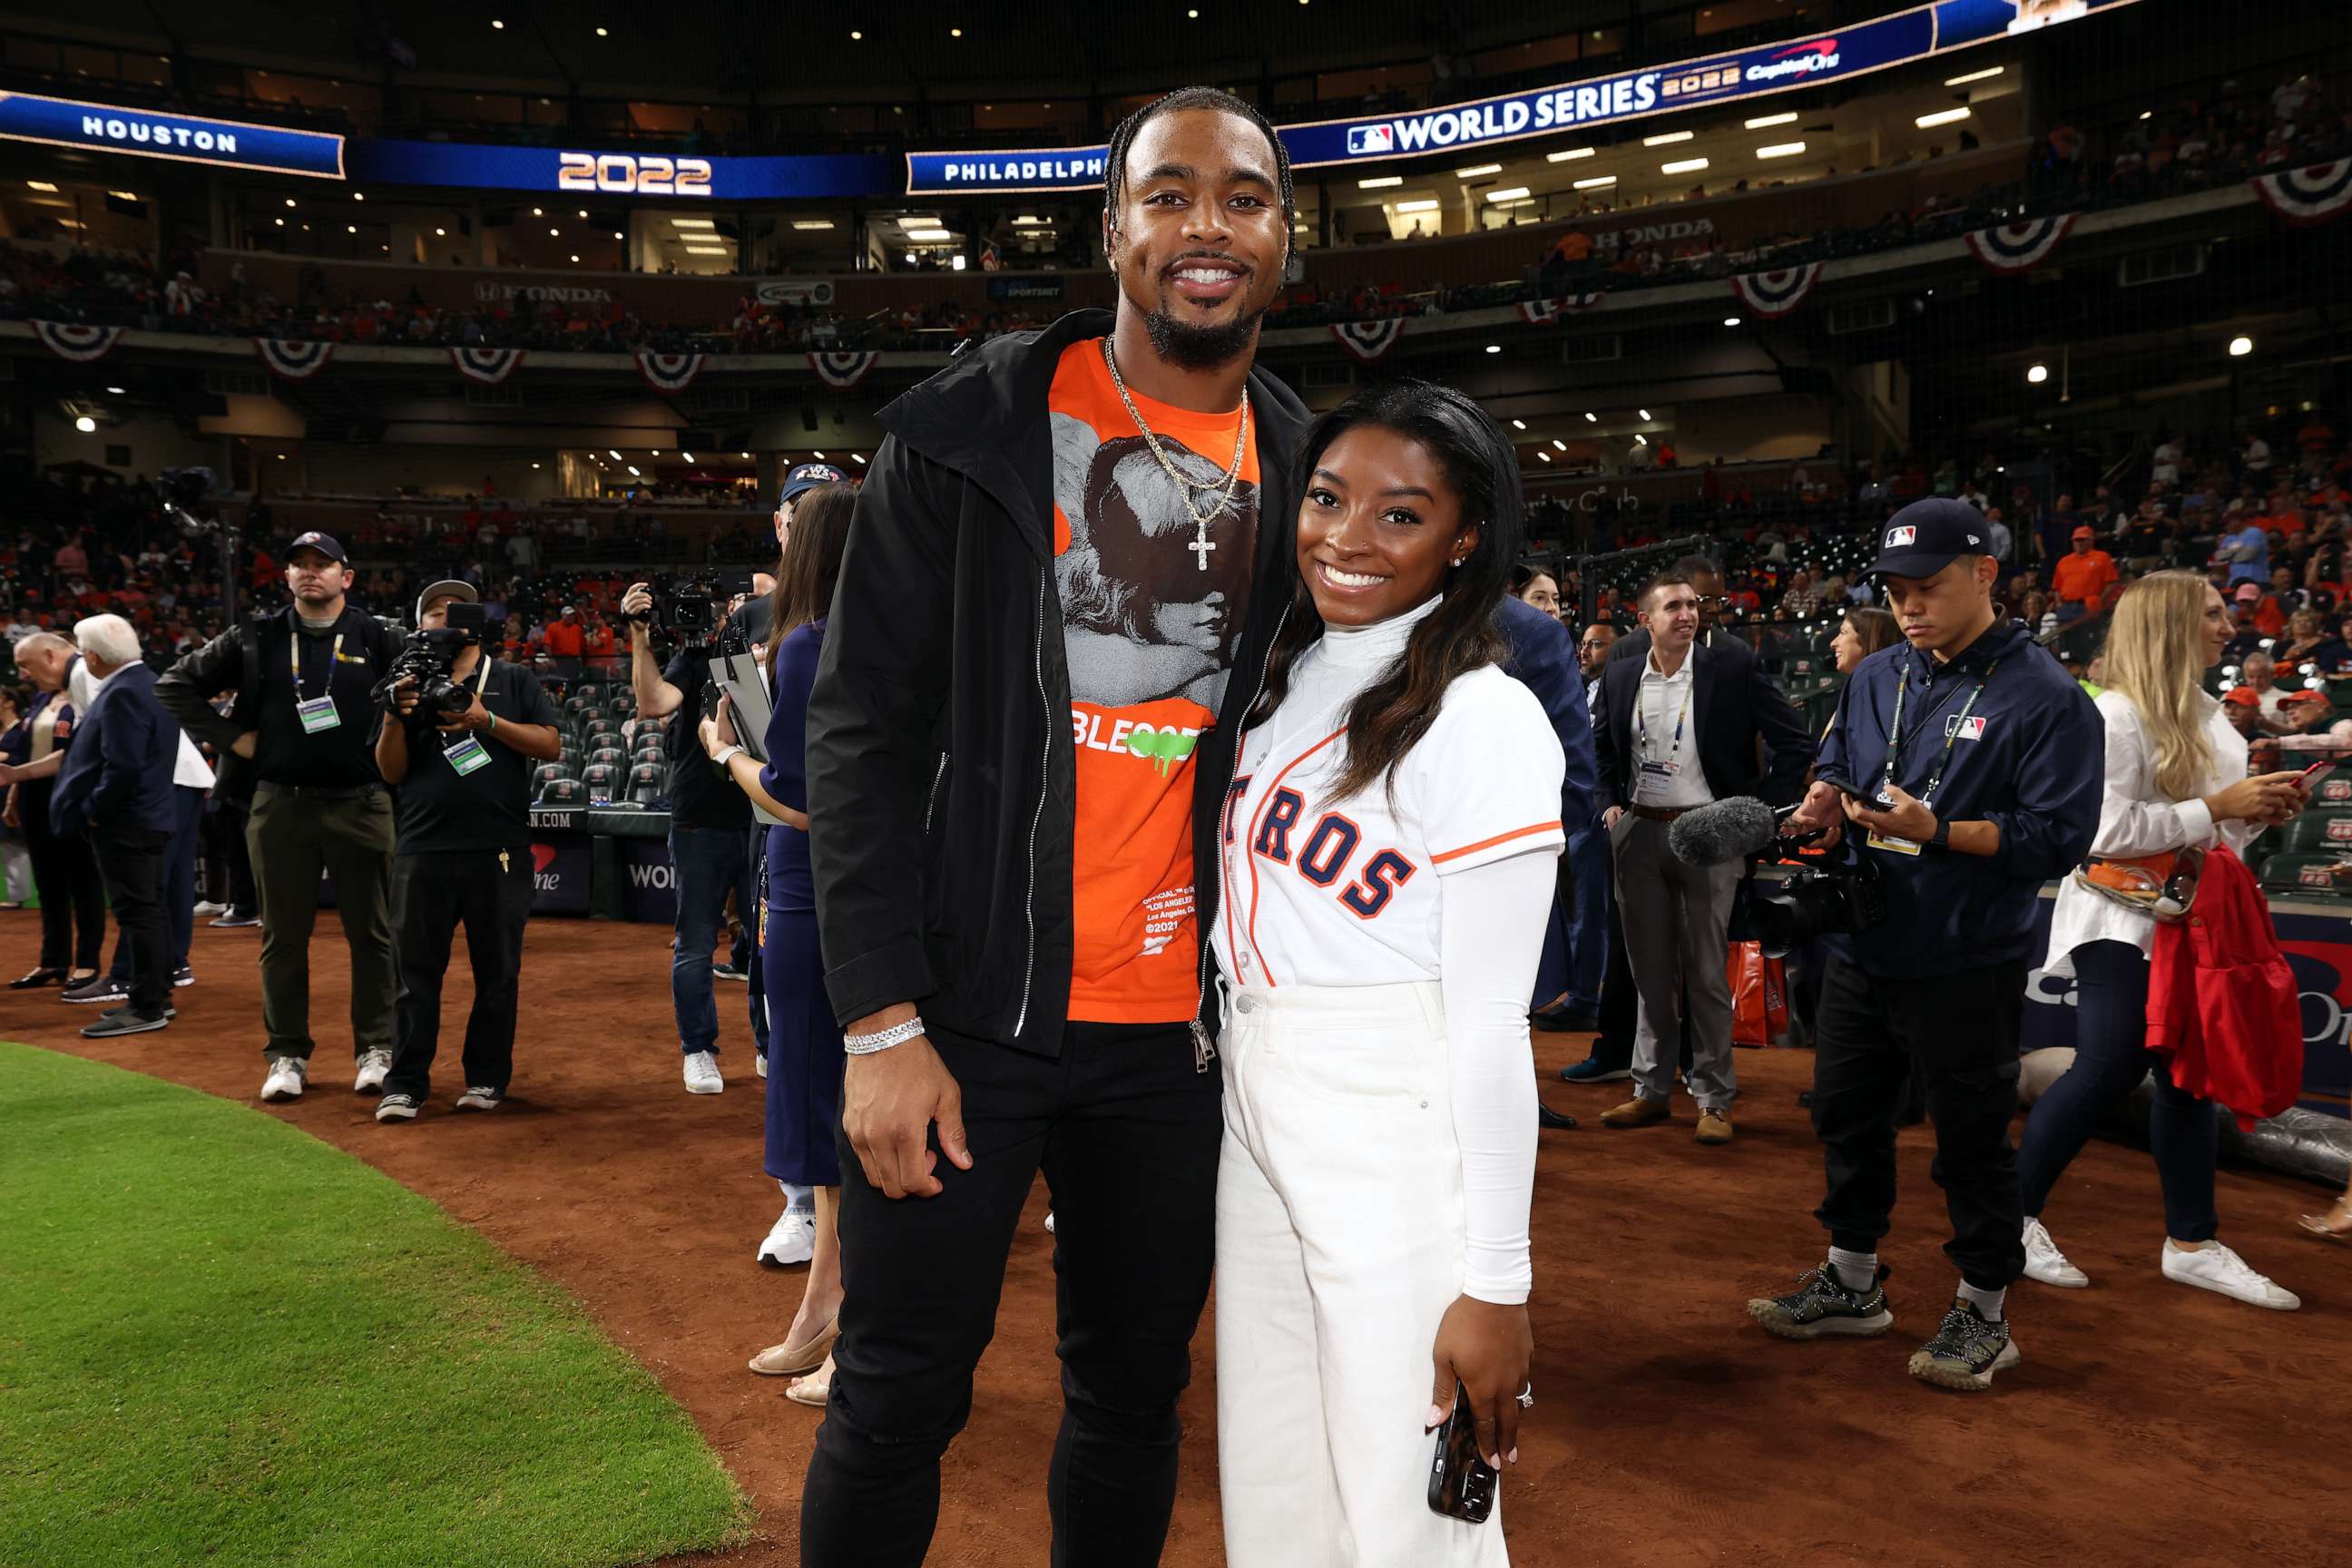 PHOTO: Simone Biles and Houston Texans safety Jonathan Owens attend the 2022 World Series, Oct. 28, 2022, in Houston.